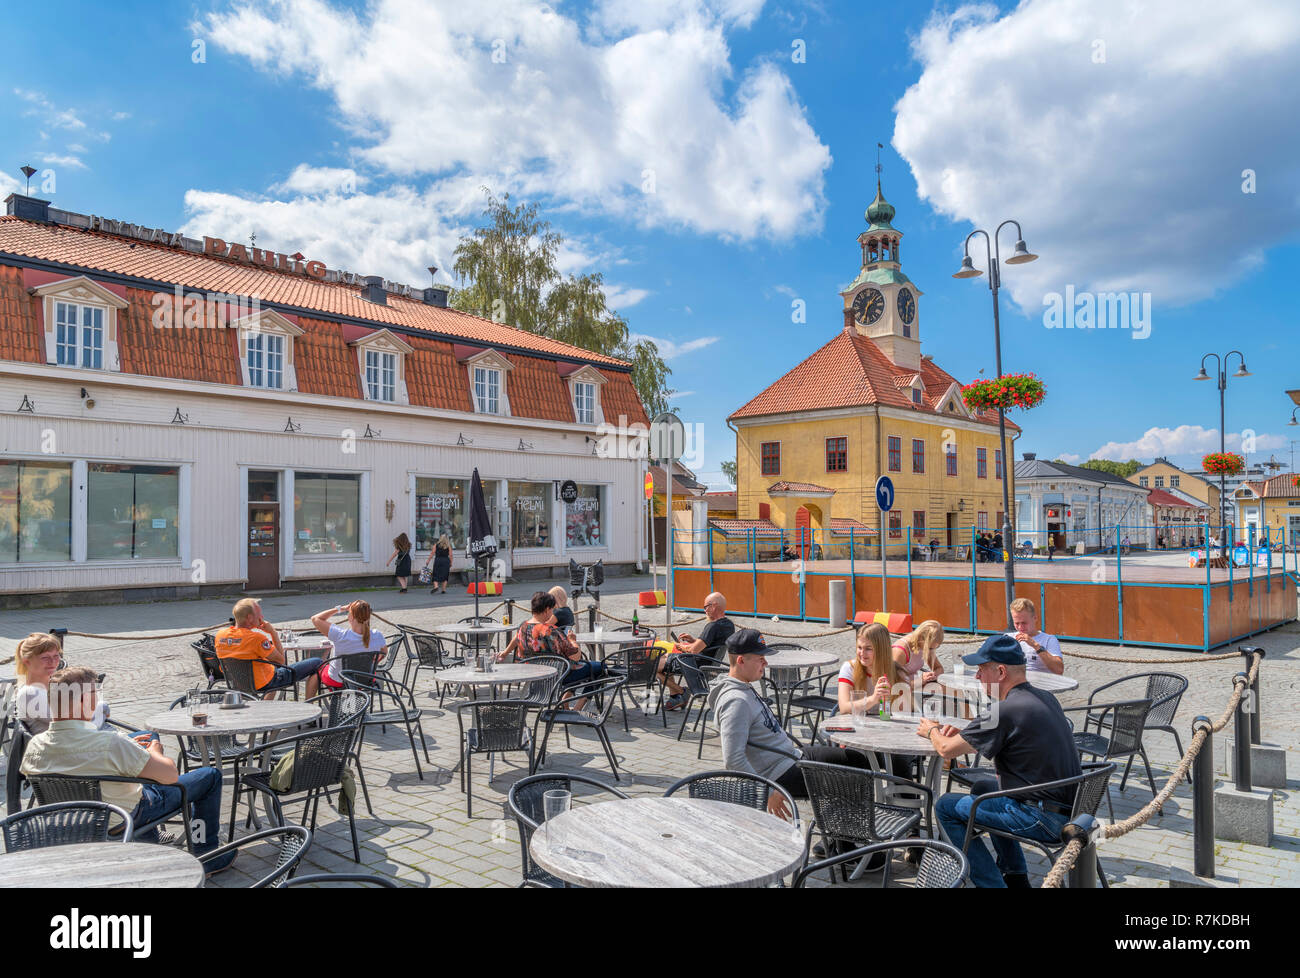 Rauma, Finland. Cafe in front of the Old Town Hall in the Market Square (Kauppatori), Vanha Rauma (Old Town District), Rauma, Satakunta, Finland Stock Photo